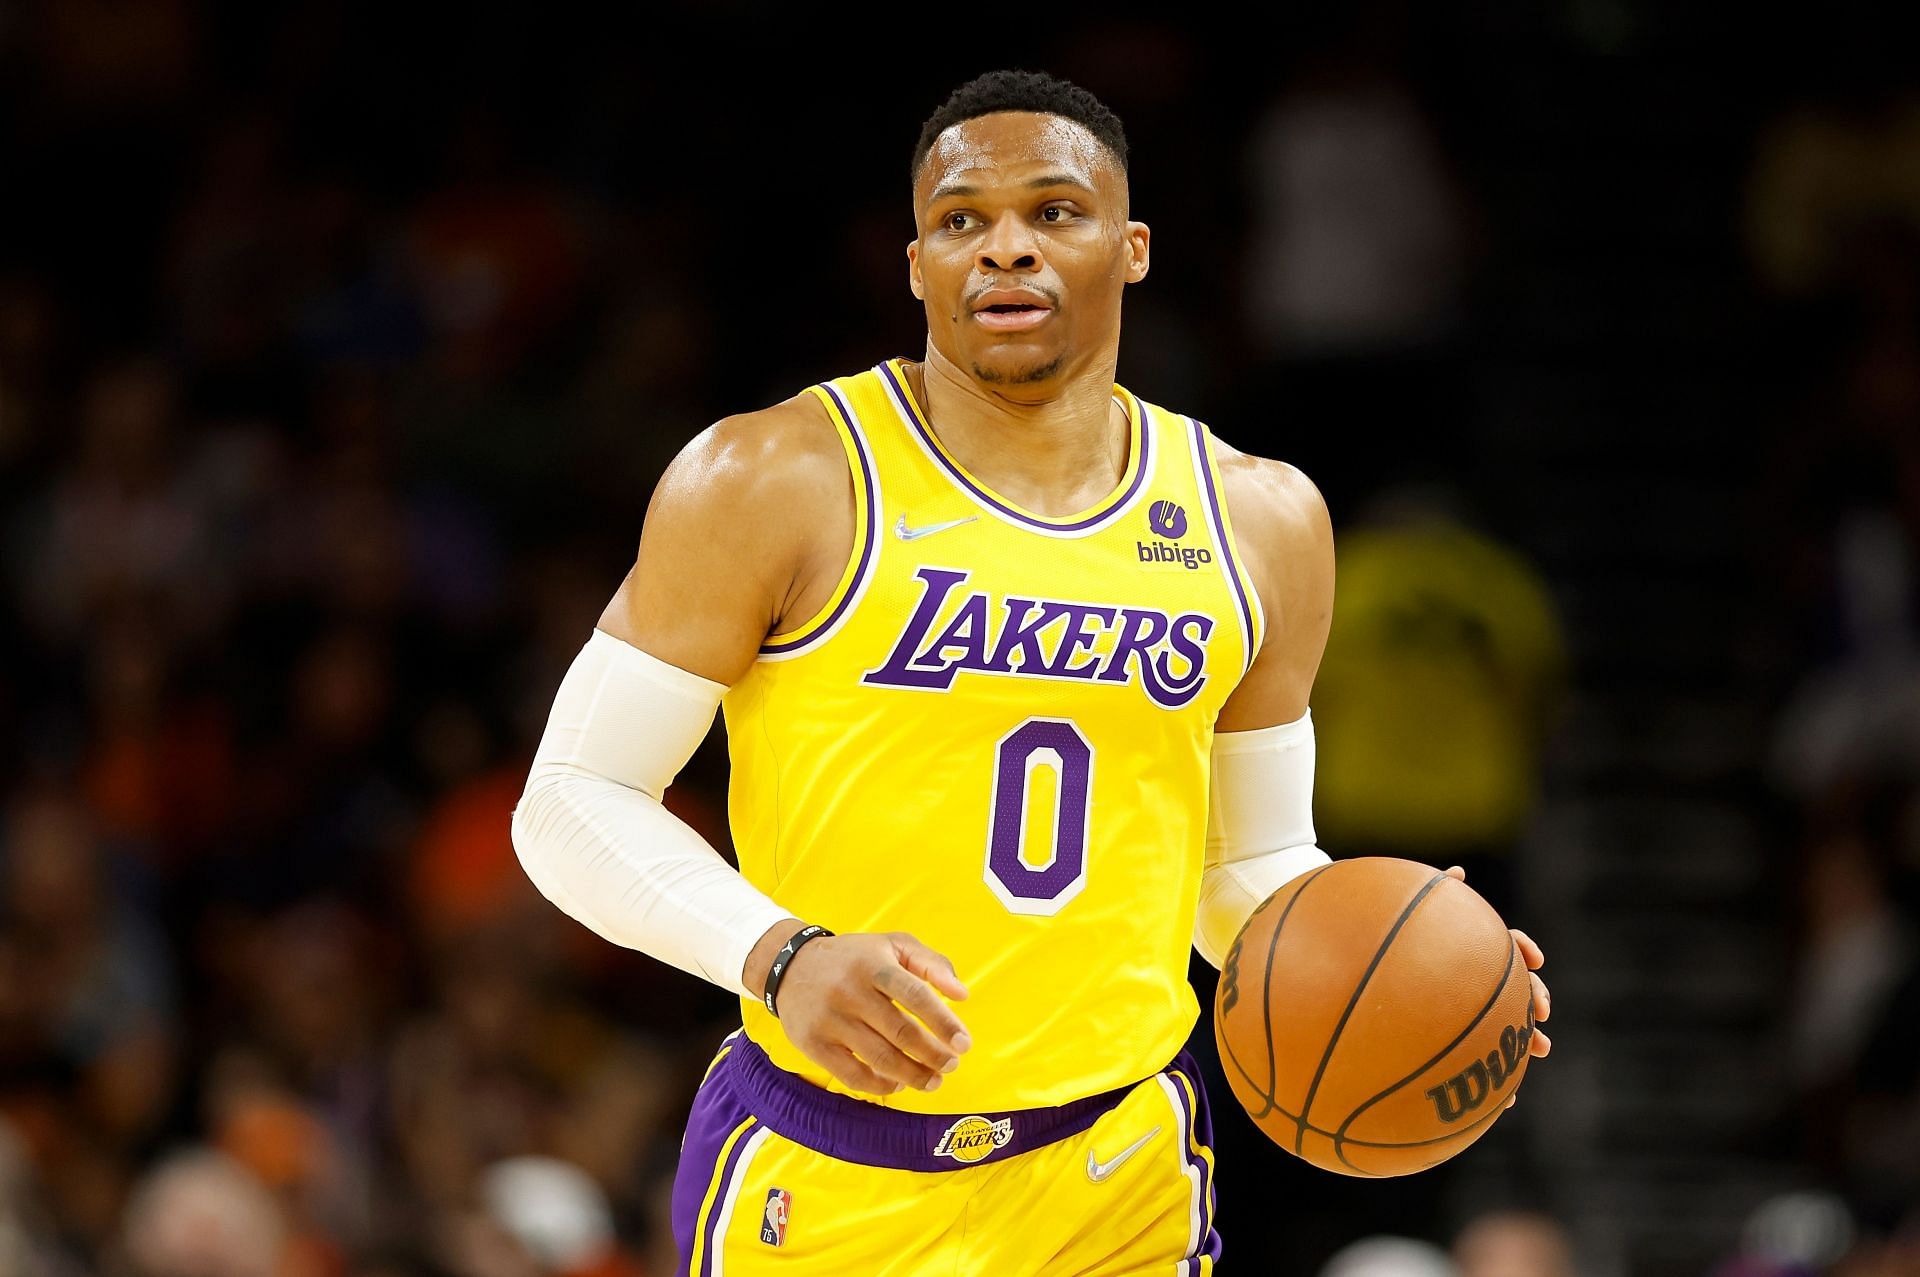 Russell Westbrook is untradable for the LA Lakers, according to Skip Bayless.